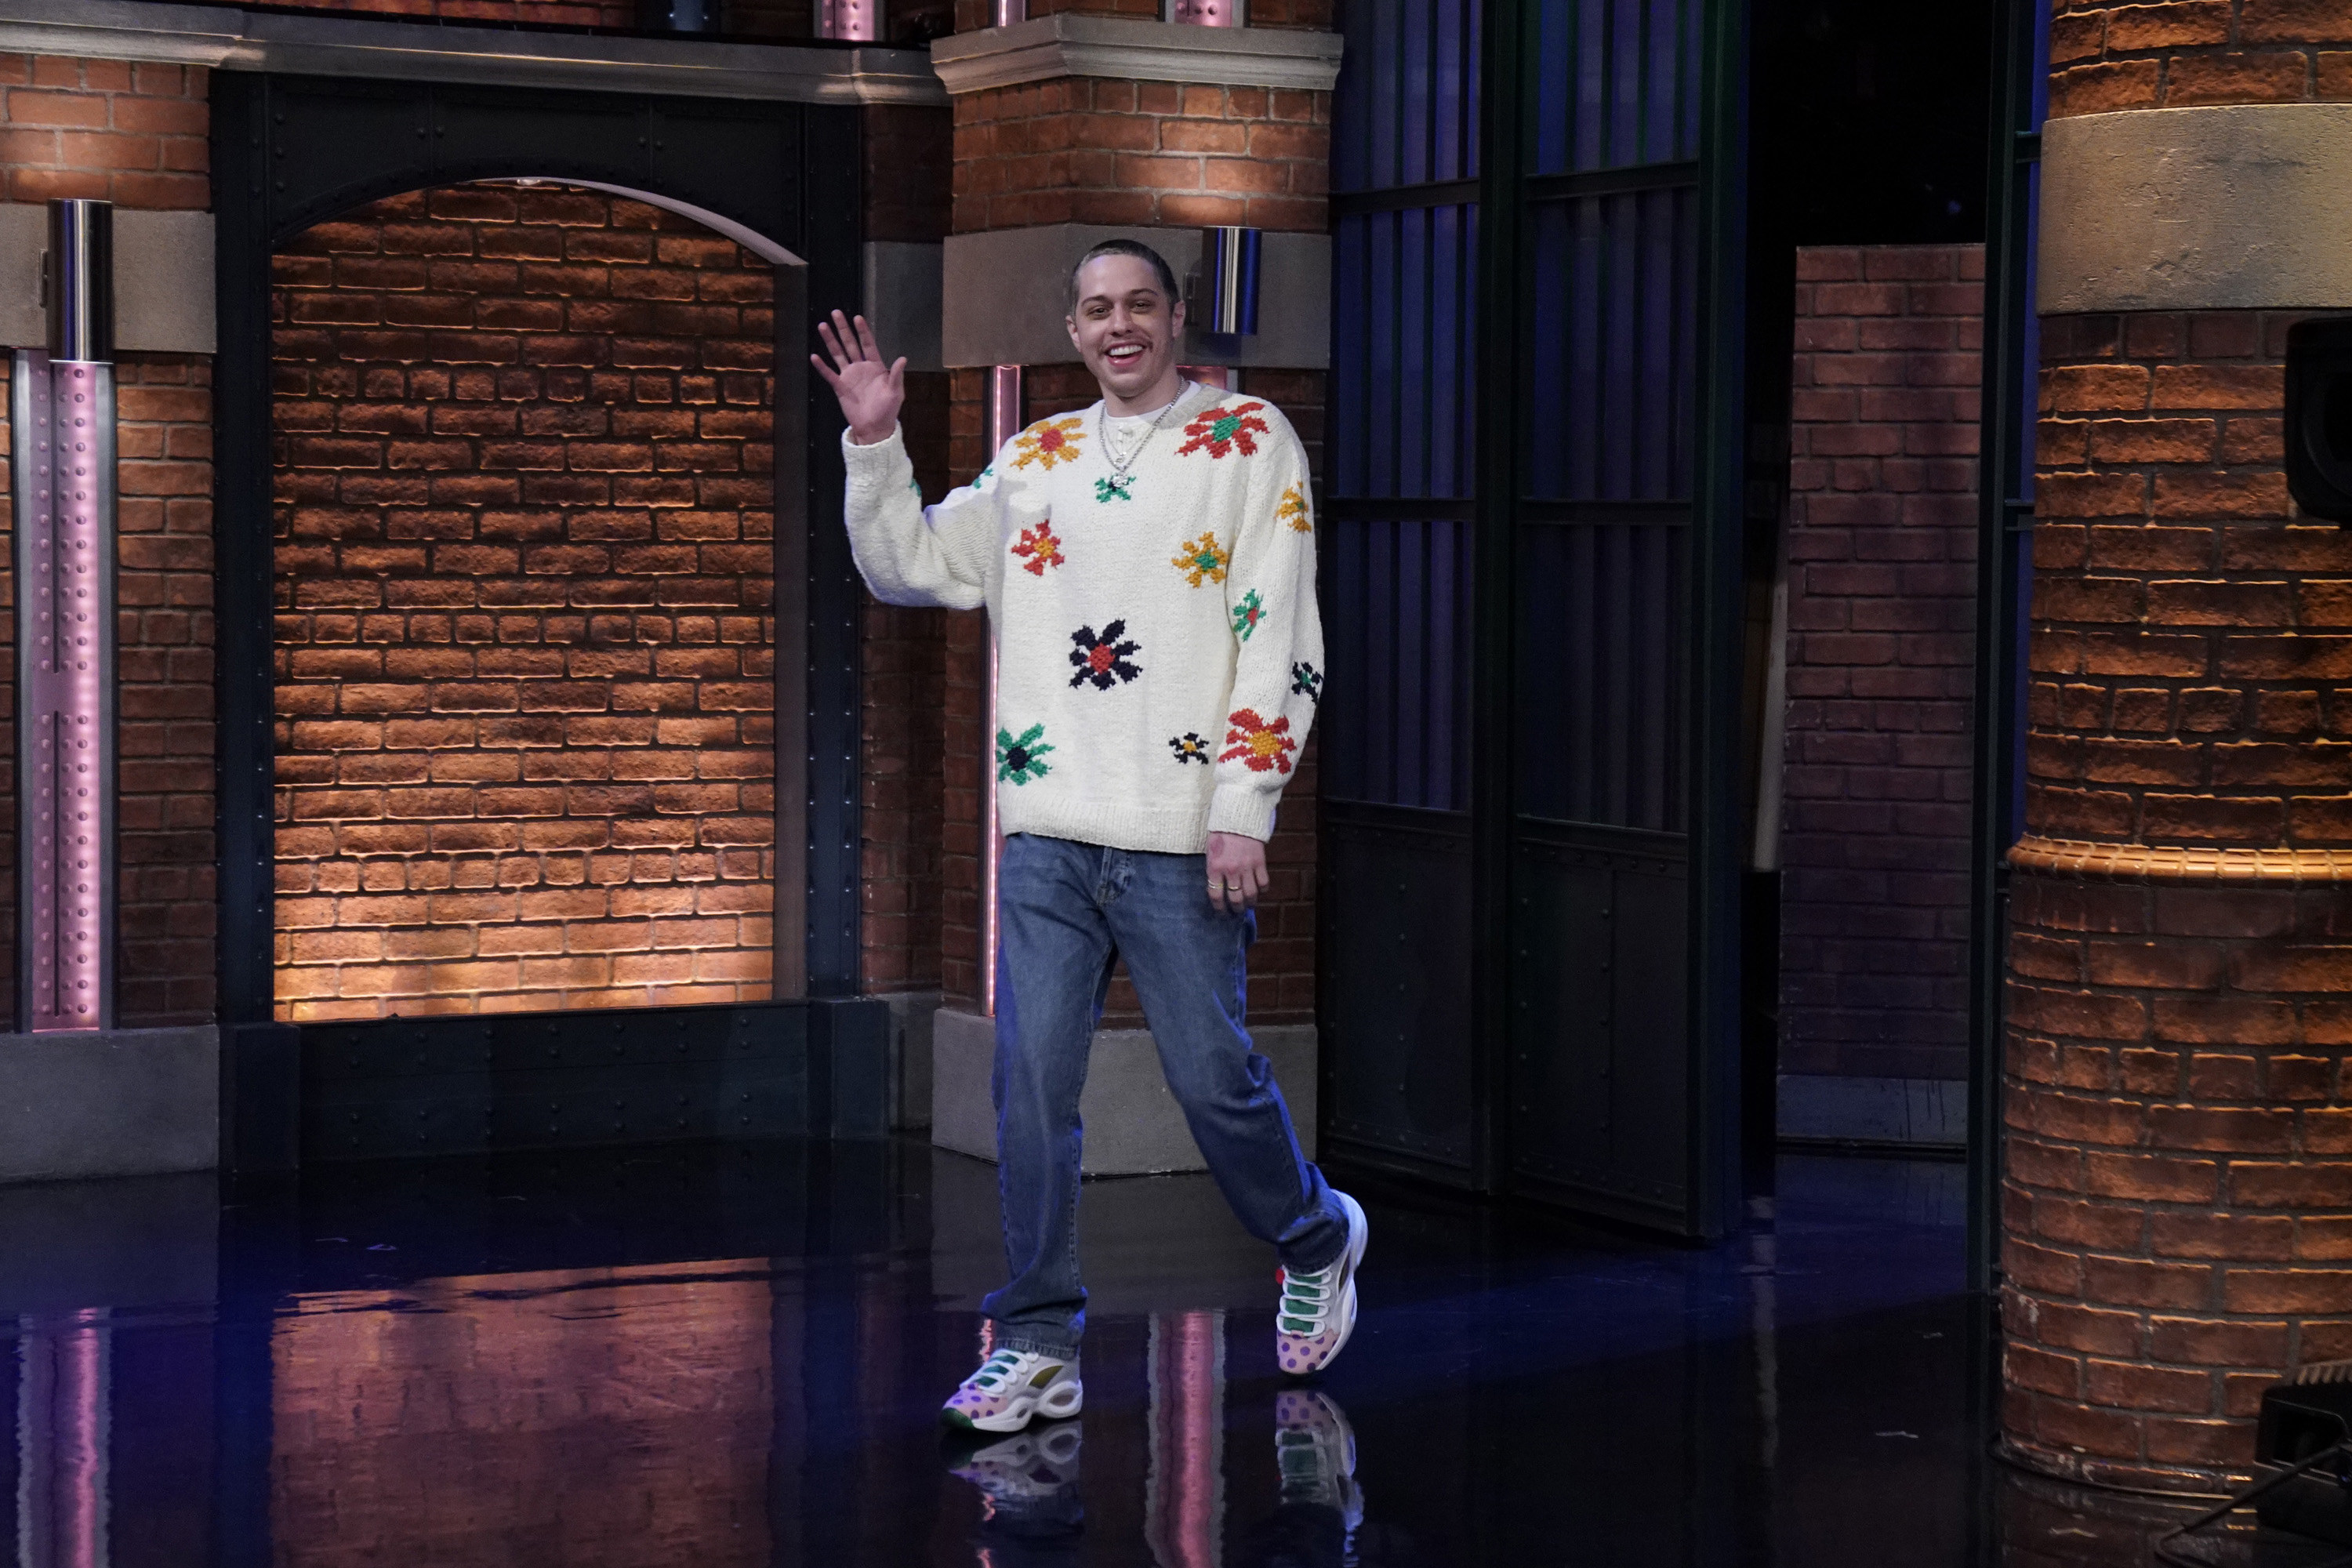 Pete Davidson waves to the audience during an appearance on Late Night With Seth Meyers in 2021